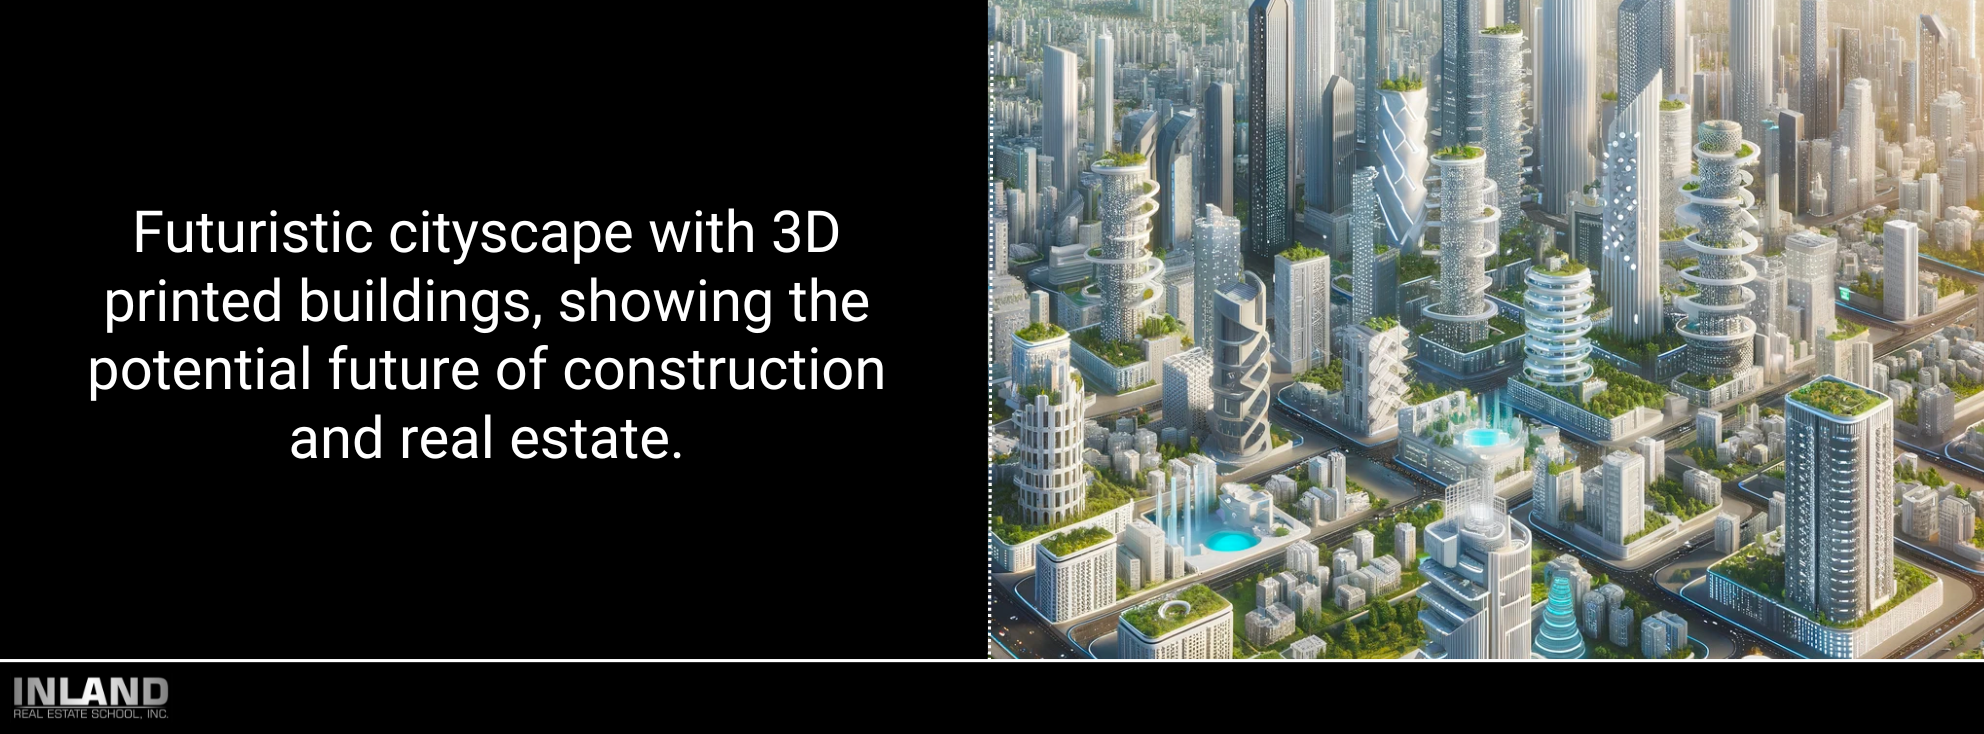 Futuristic cityscape with 3D printed buildings, showing the potential future of construction and real estate.